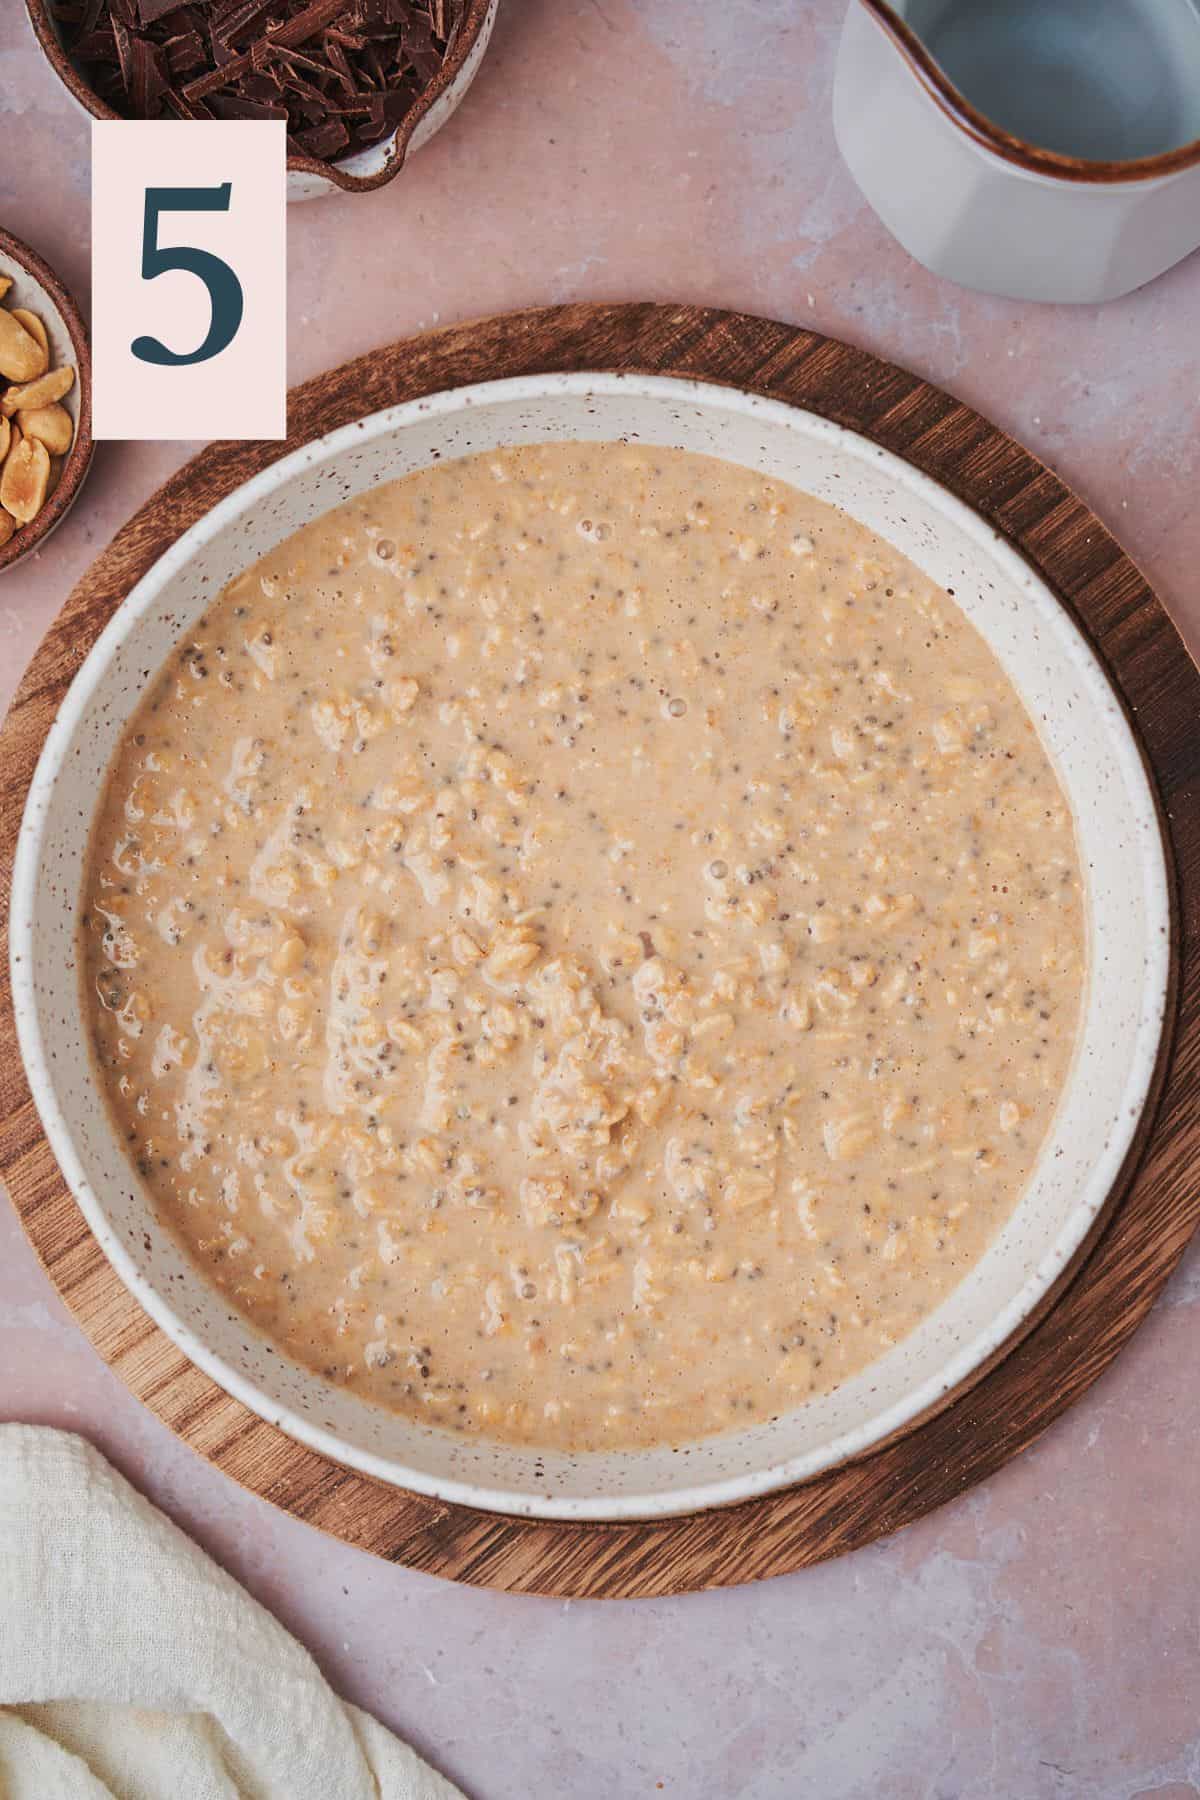 creamy overnight oats mixture in a large bowl.